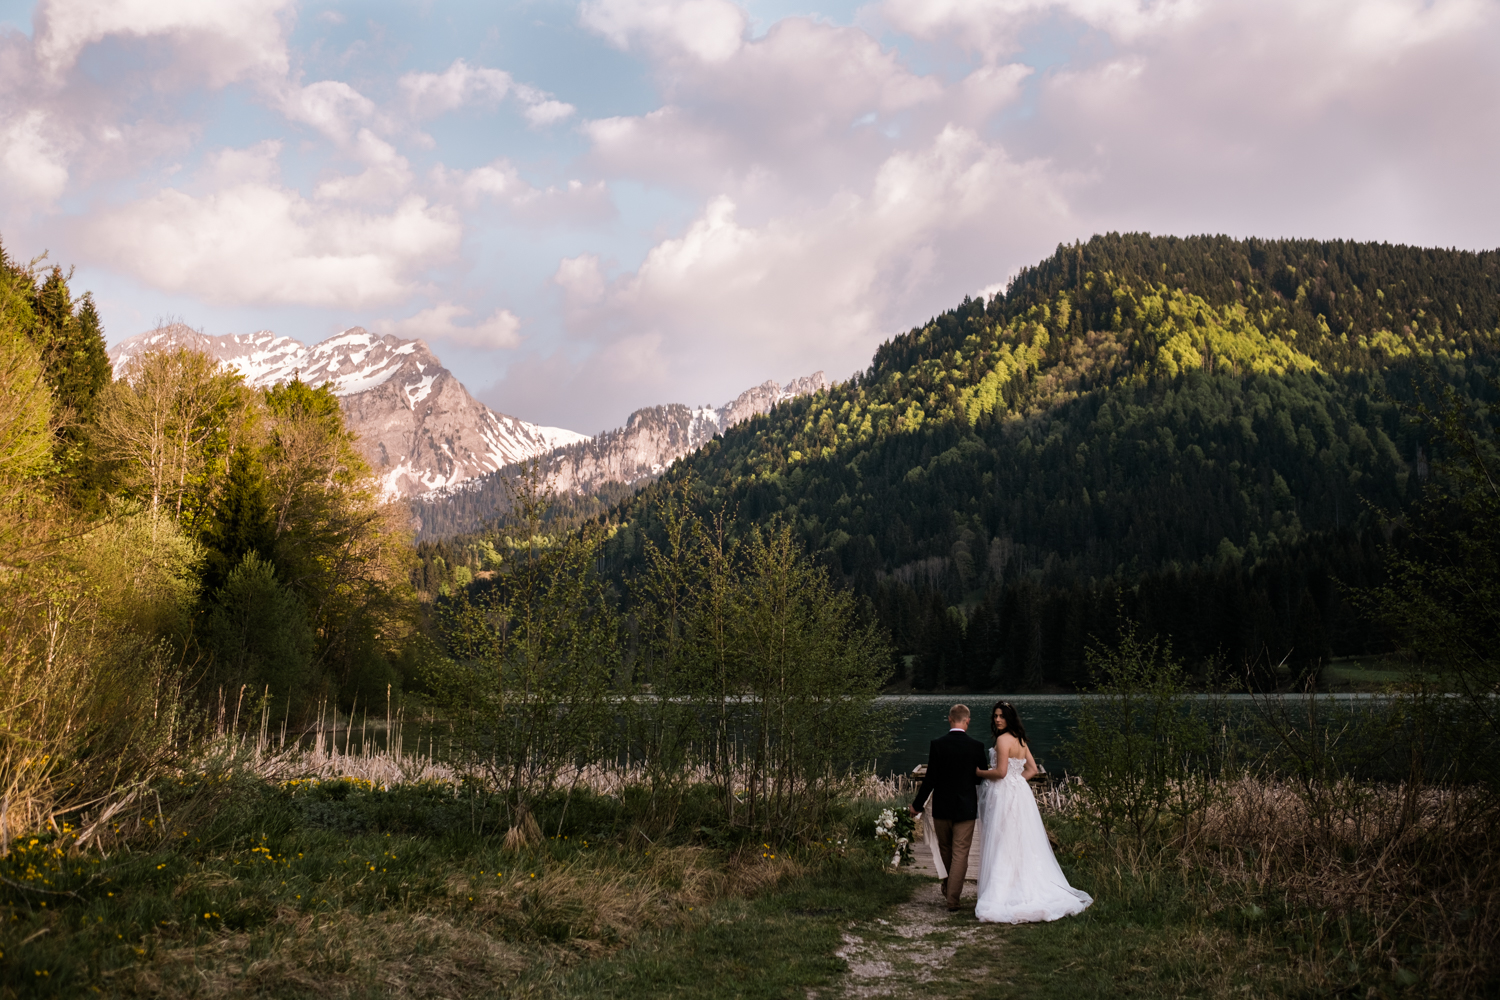 This couple eloped in a valley of the French Alps, complete with mountains, alpine lakes and old world churches.